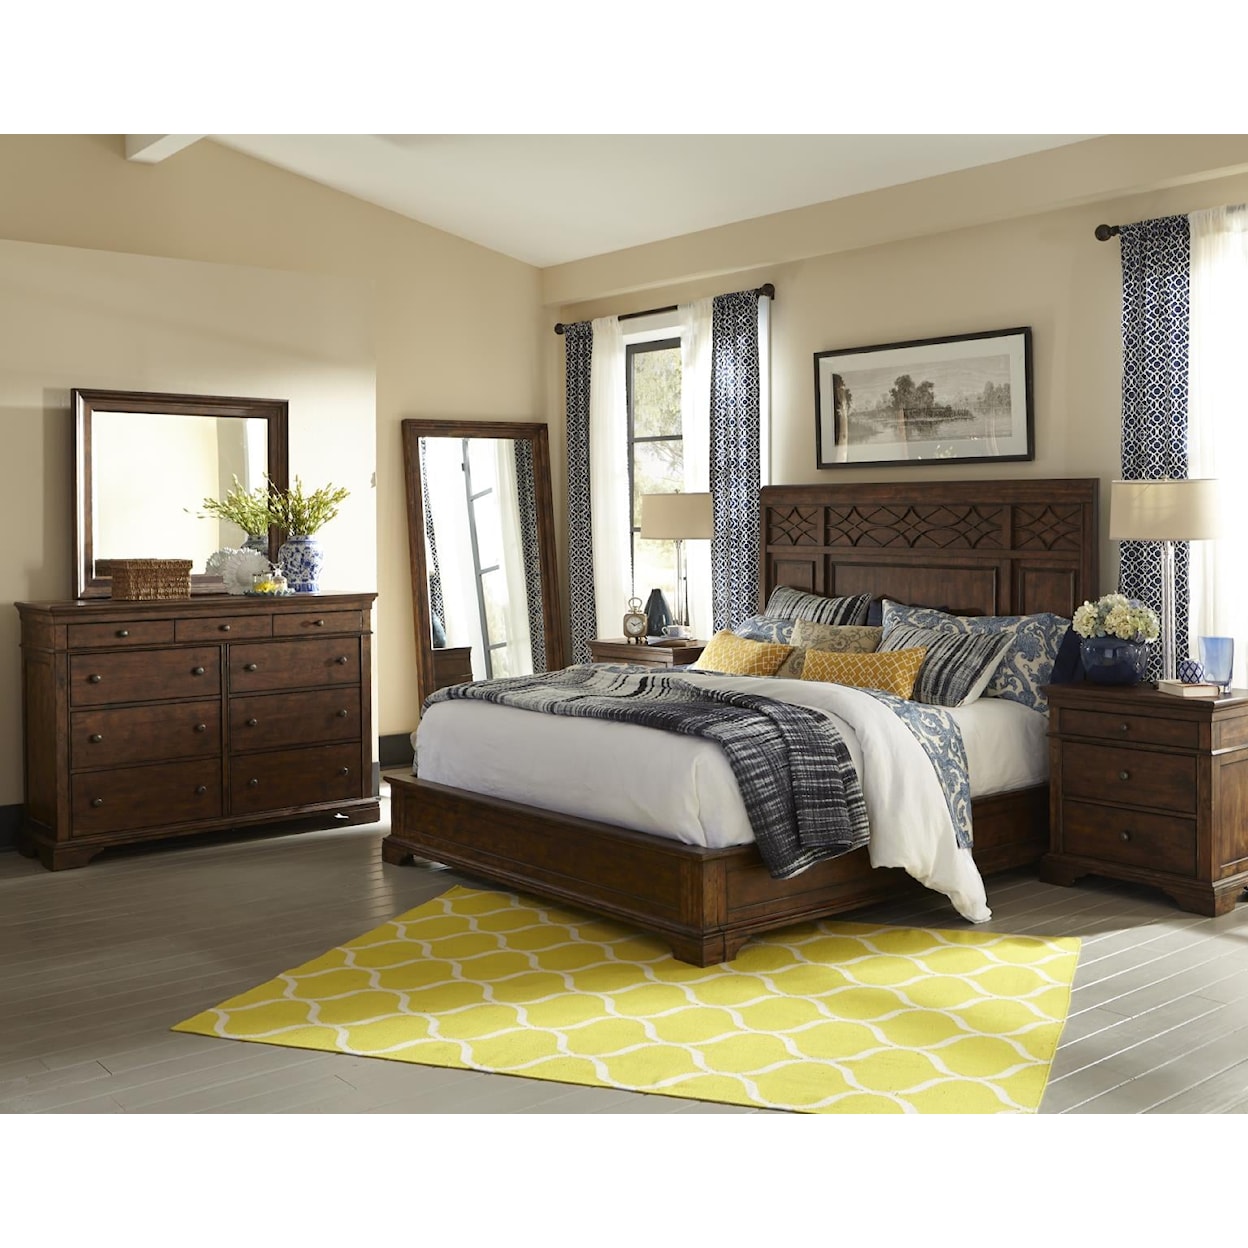 Trisha Yearwood Home Collection by Legacy Classic Trisha Yearwood Home 6-Piece Bedroom Set